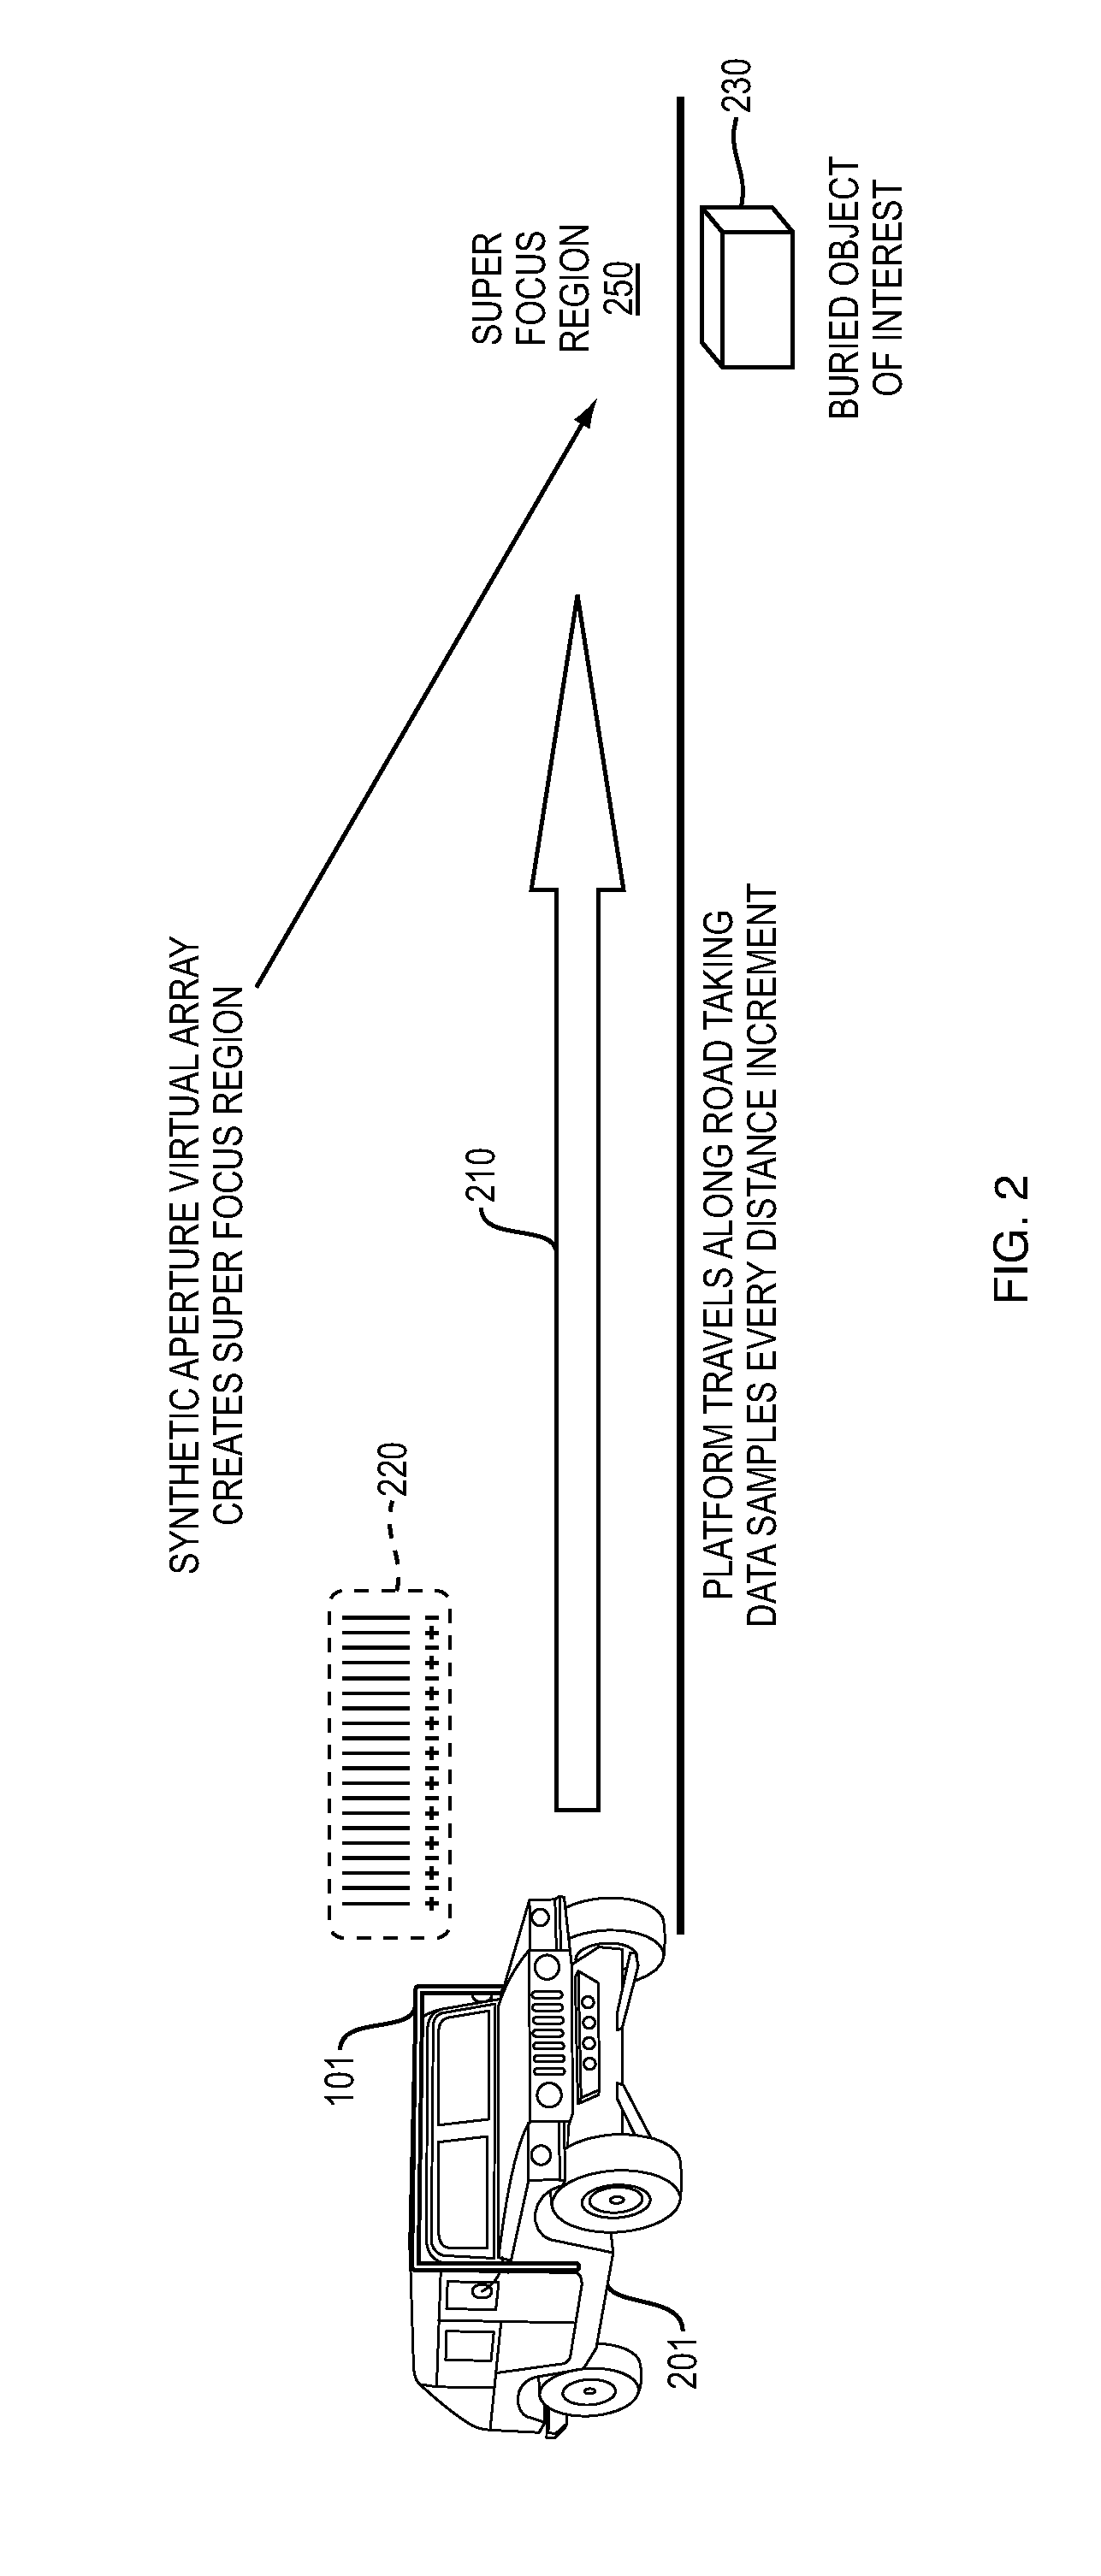 Near field subwavelength focusing synthetic aperture radar with chemical detection mode